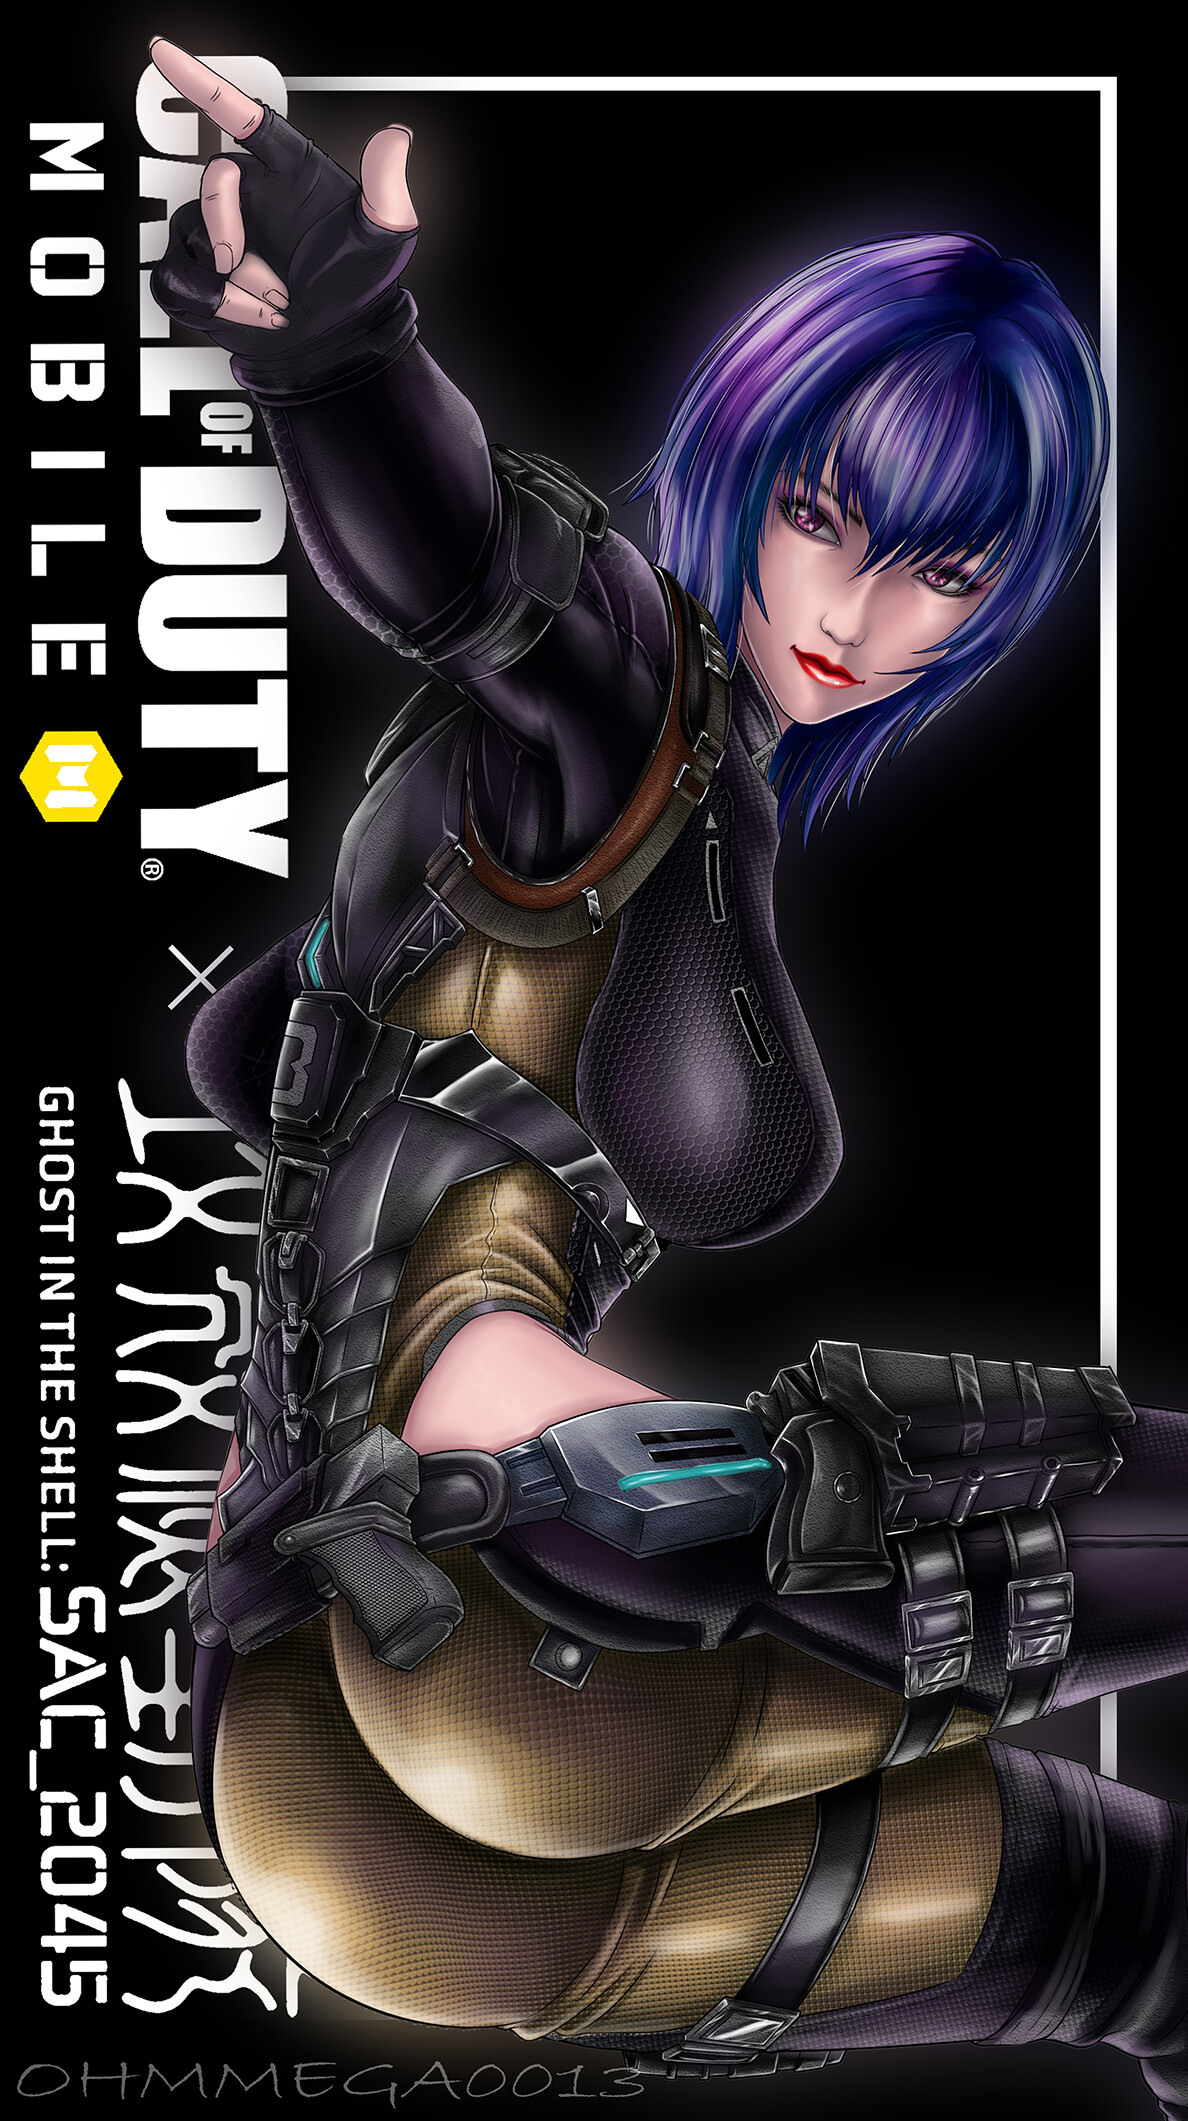 Motoko - Ghost in the Shell (Call of Duty Mobile-fan art) by ohmmega0013 Sex Images Hq